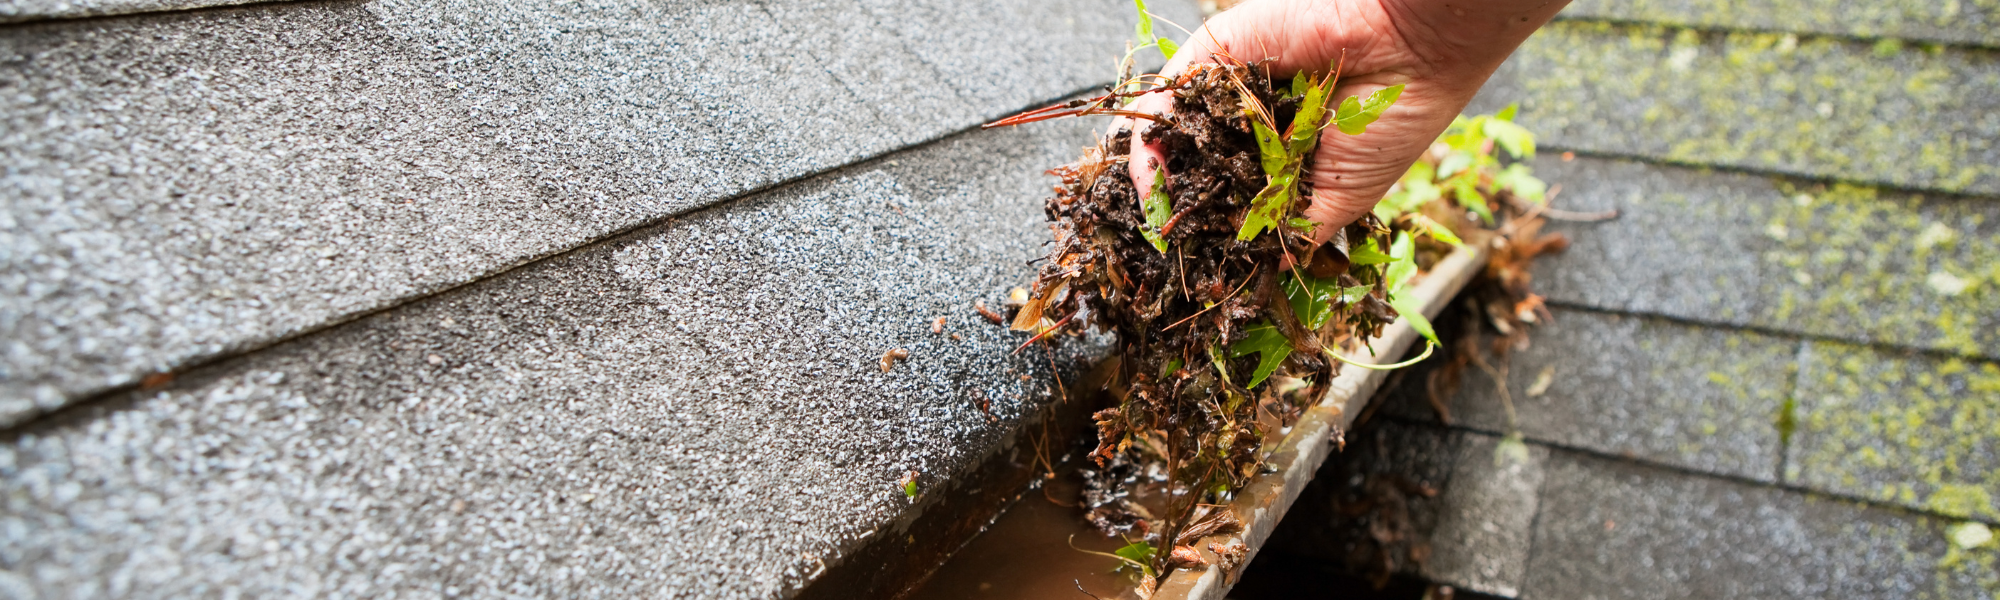 Most Frequent Problems with Gutters in Destin